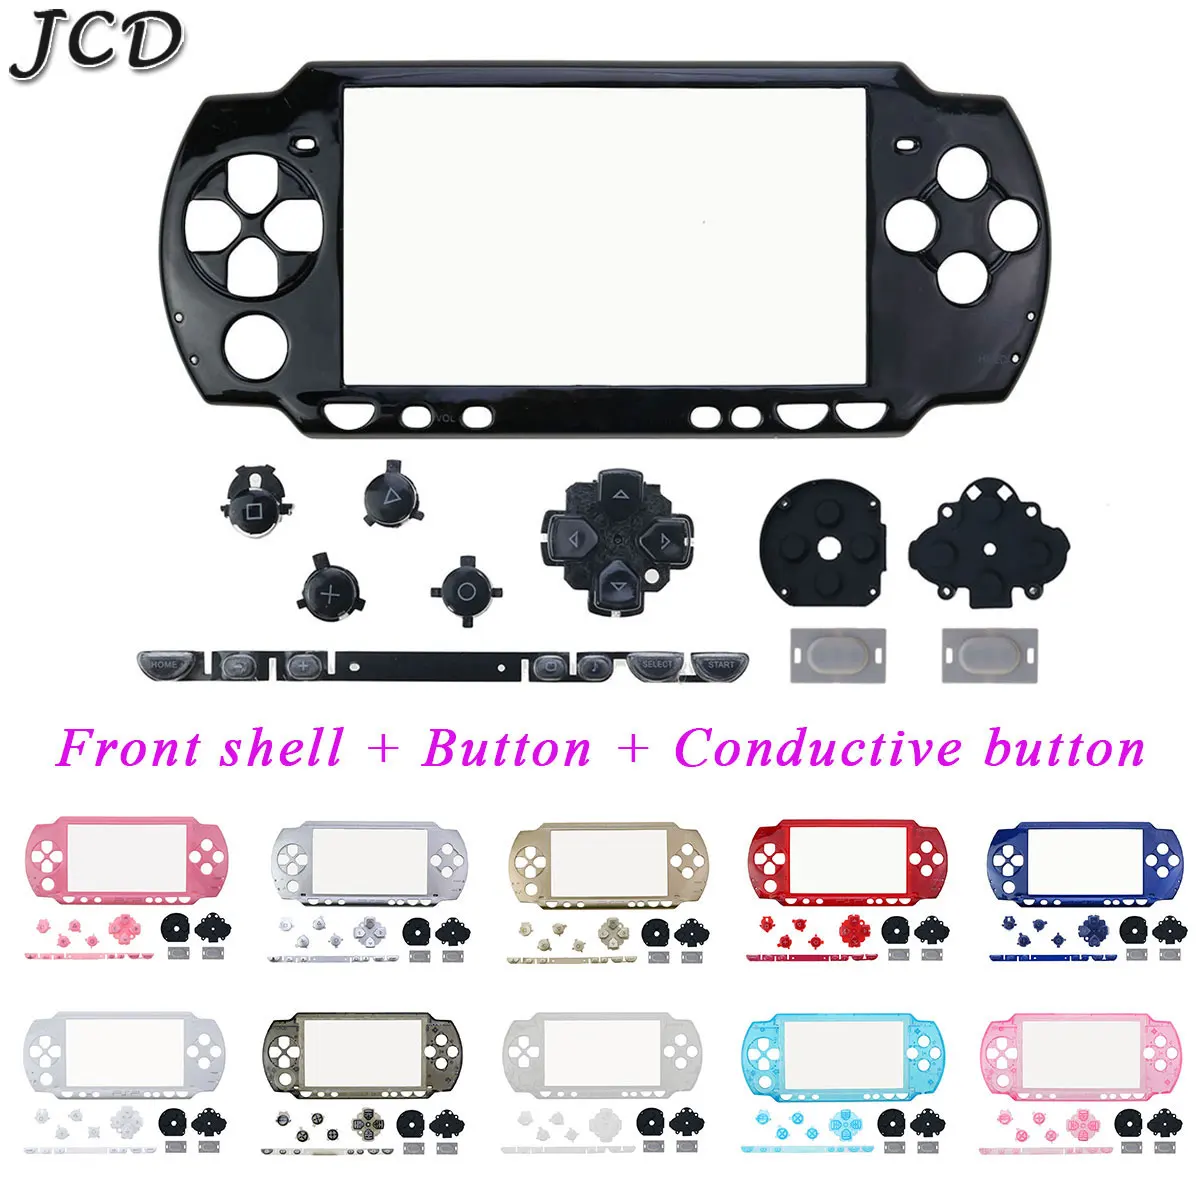 

JCD Front Case Cover Housing Shell W/ Conductive Rubber Button Switch L R ABXY Buttons Kit for Sony PSP 1000 PSP1000